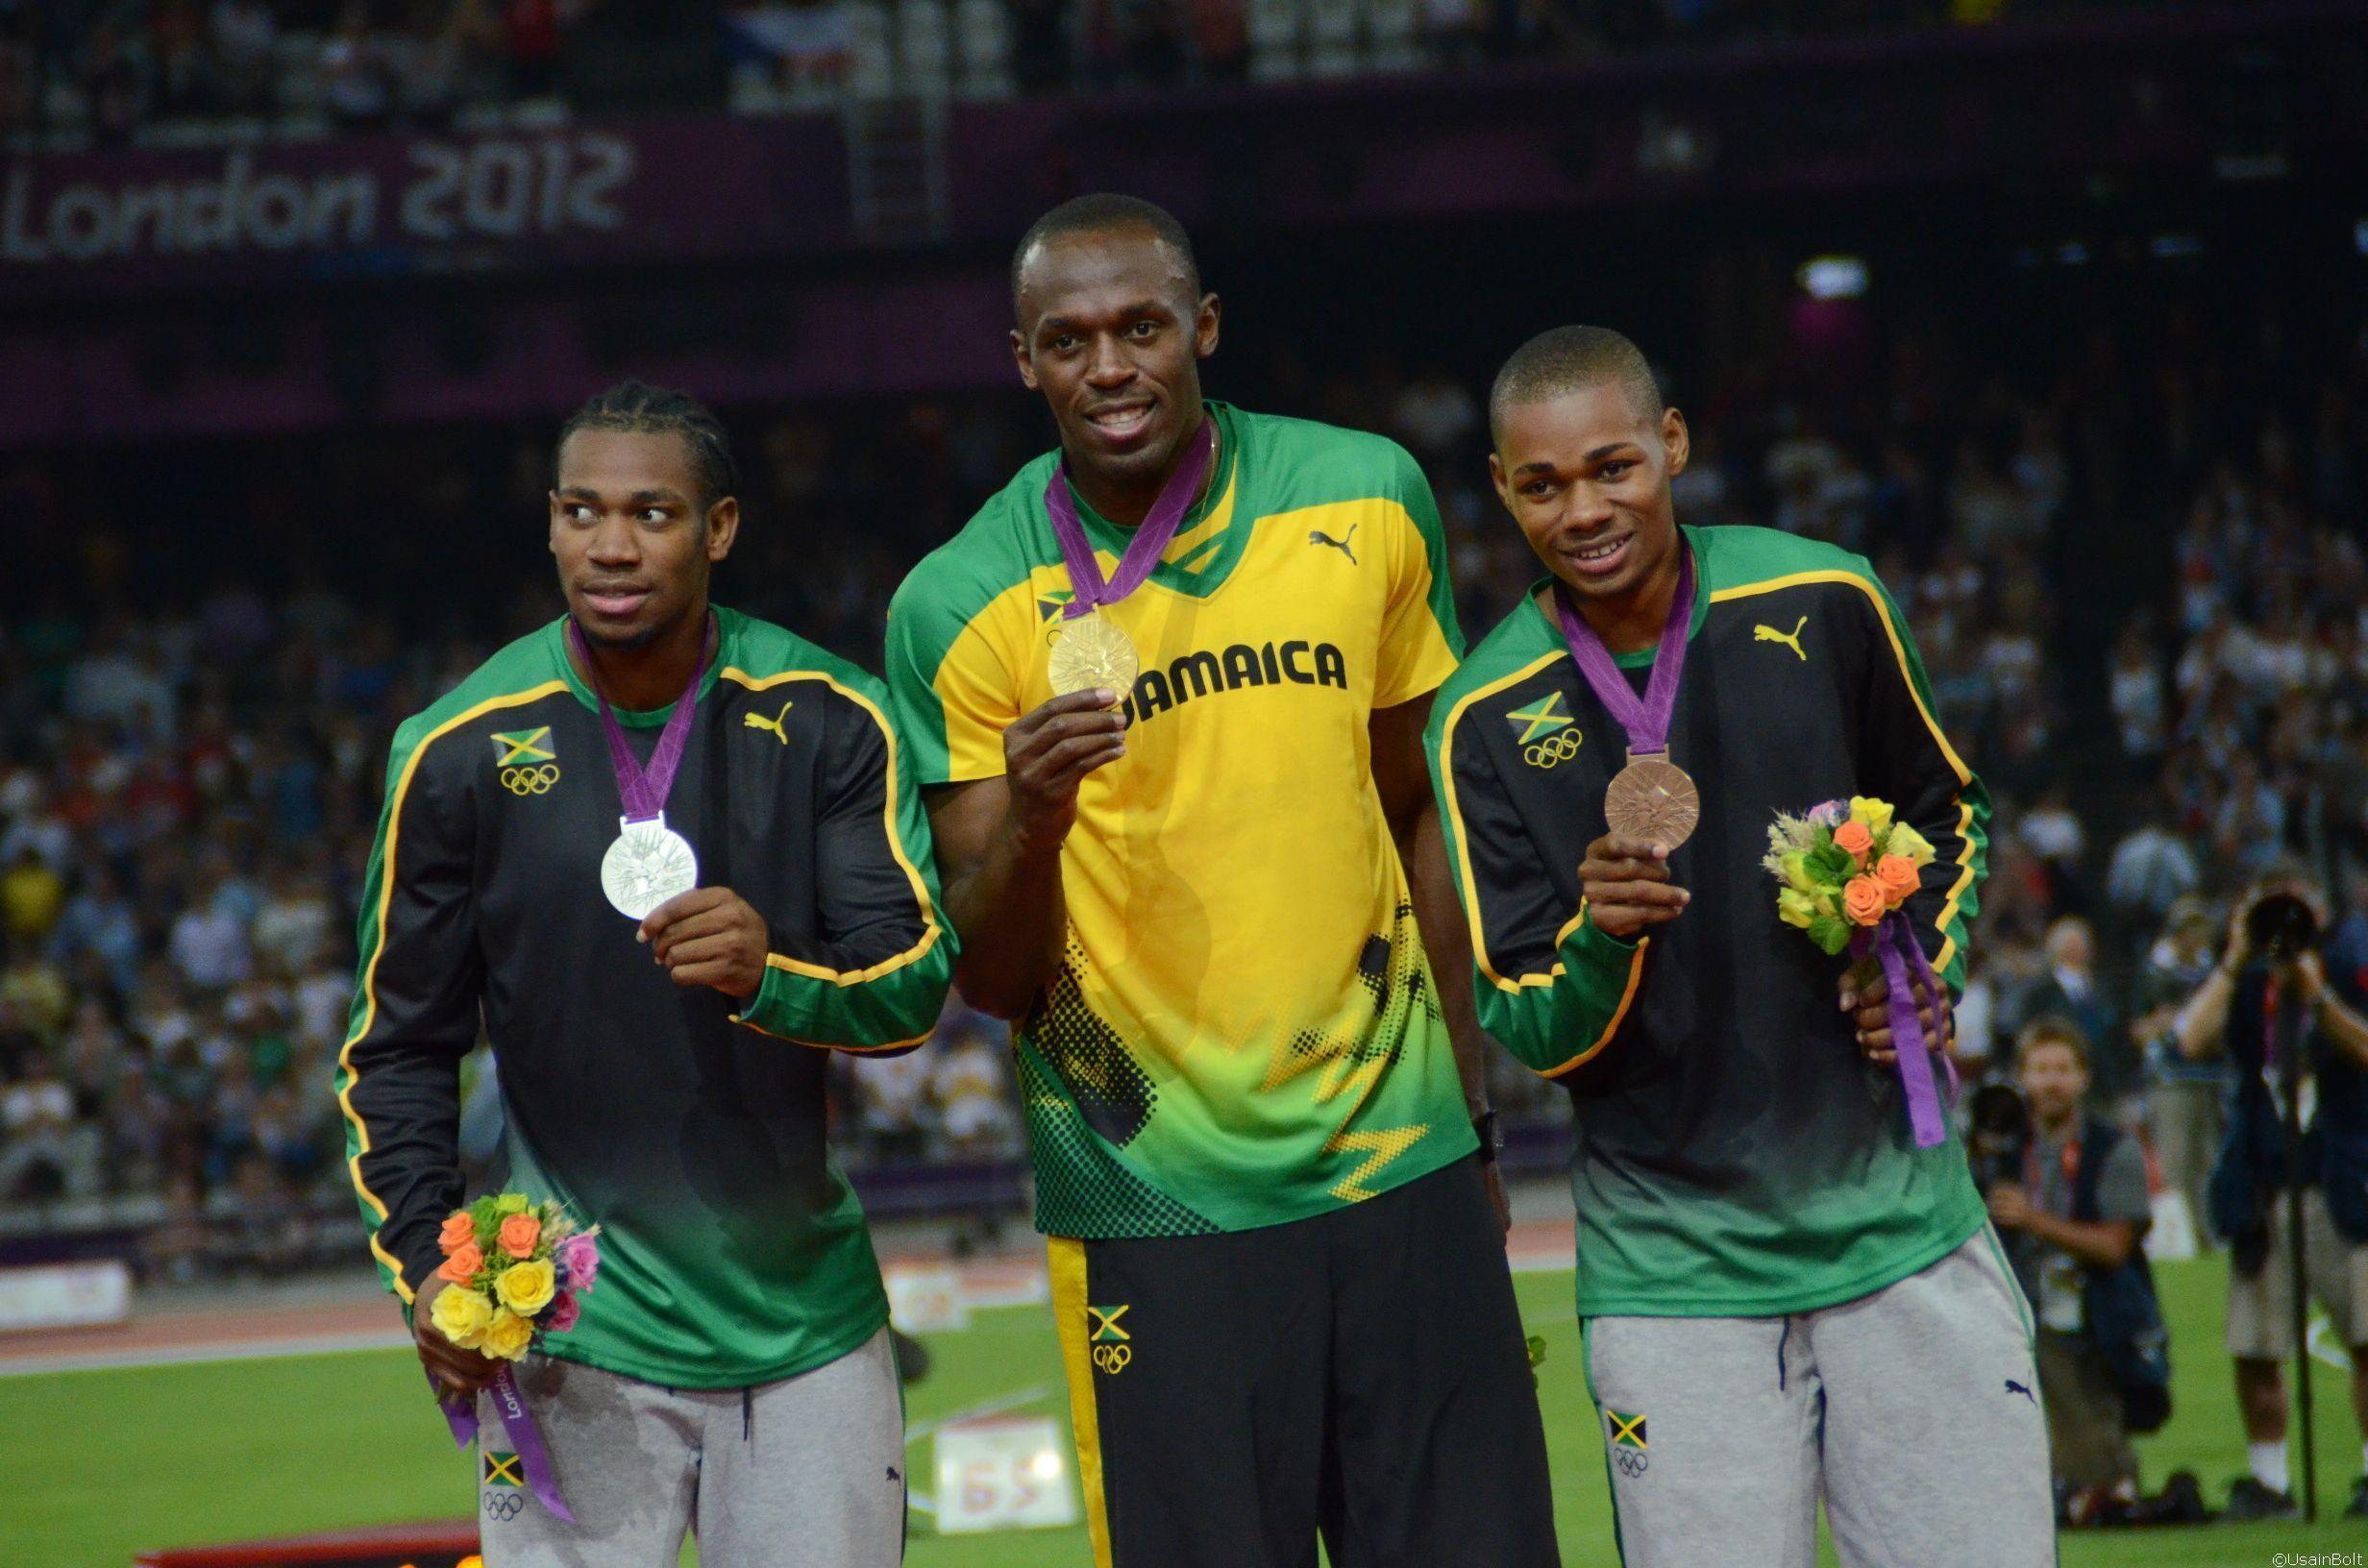 Usain Bolt. Bolt leads Jamaica's sweep of the Olympic Games 200 metres